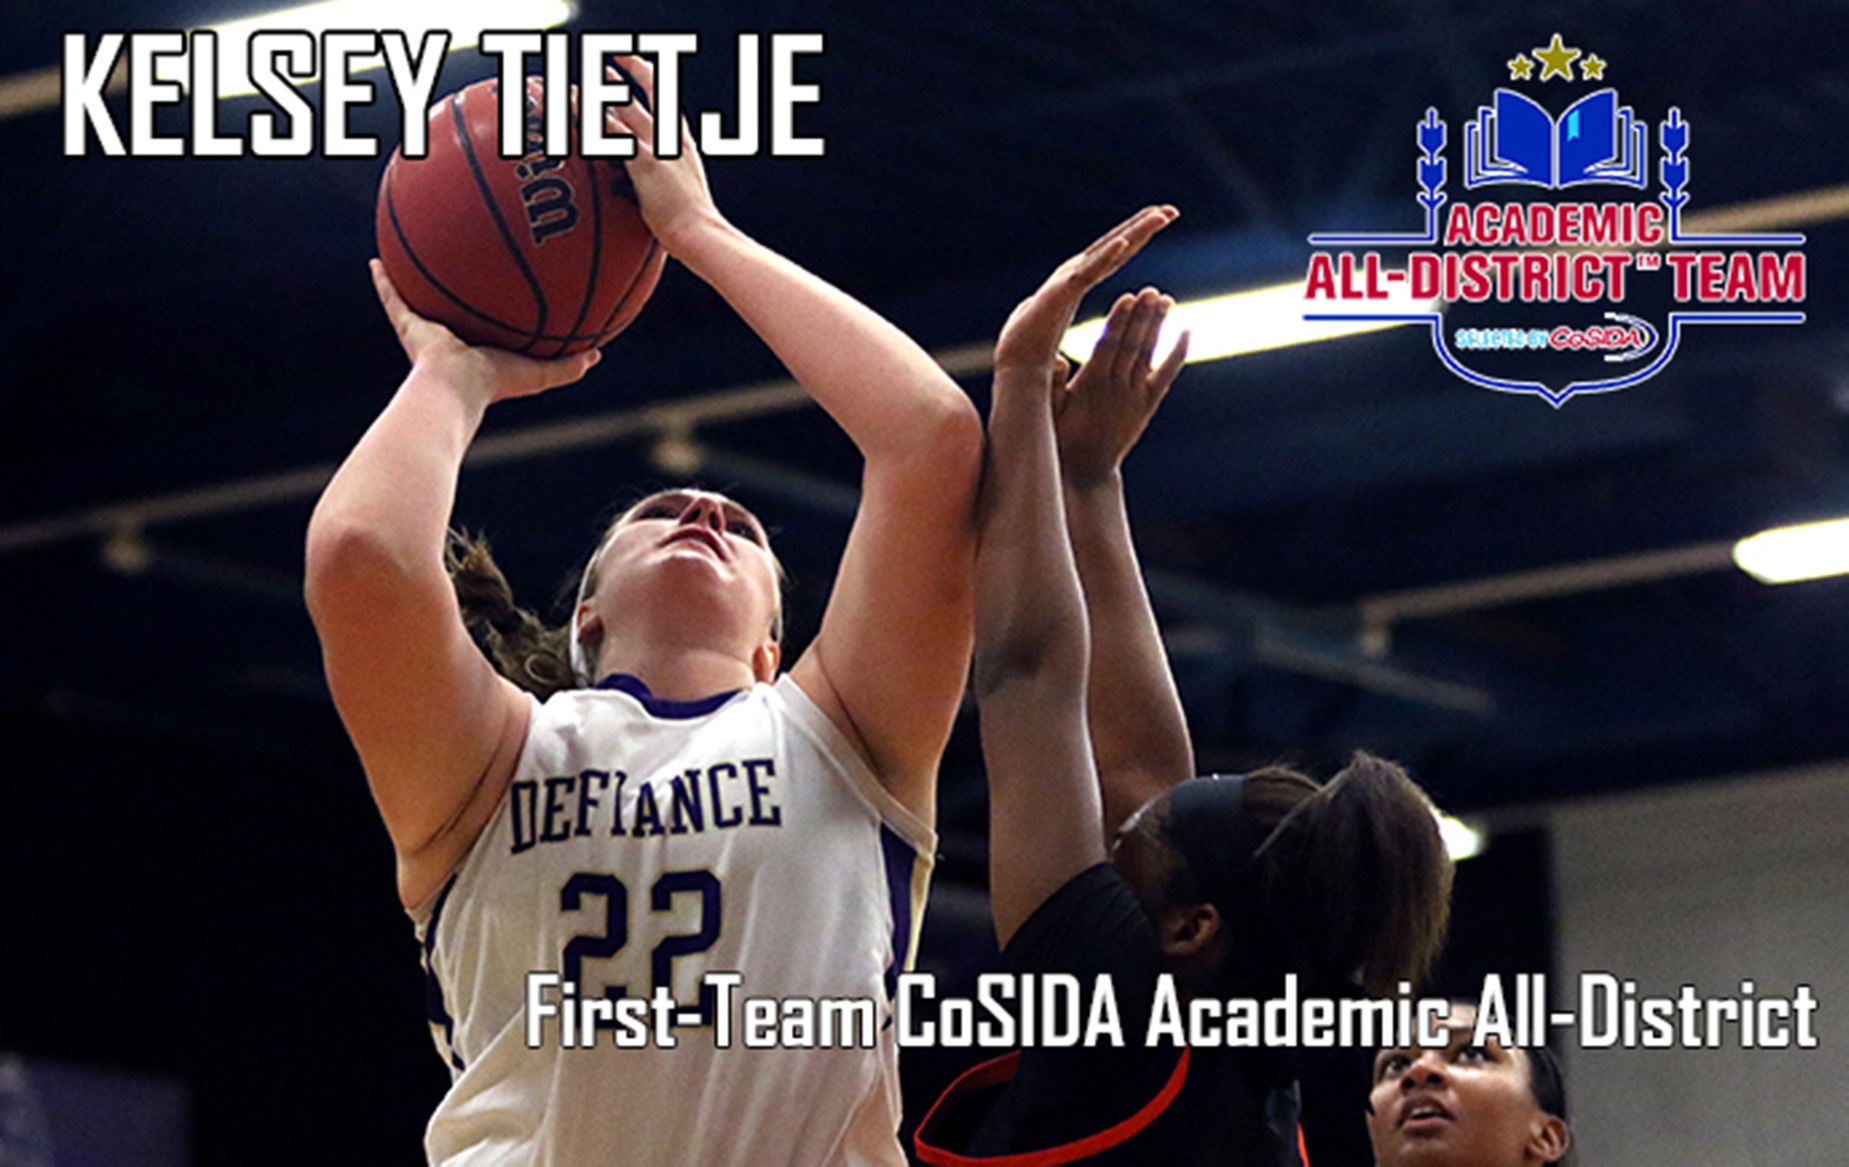 Defiance's Kelsey tietje Named CoSIDA Academic All-District